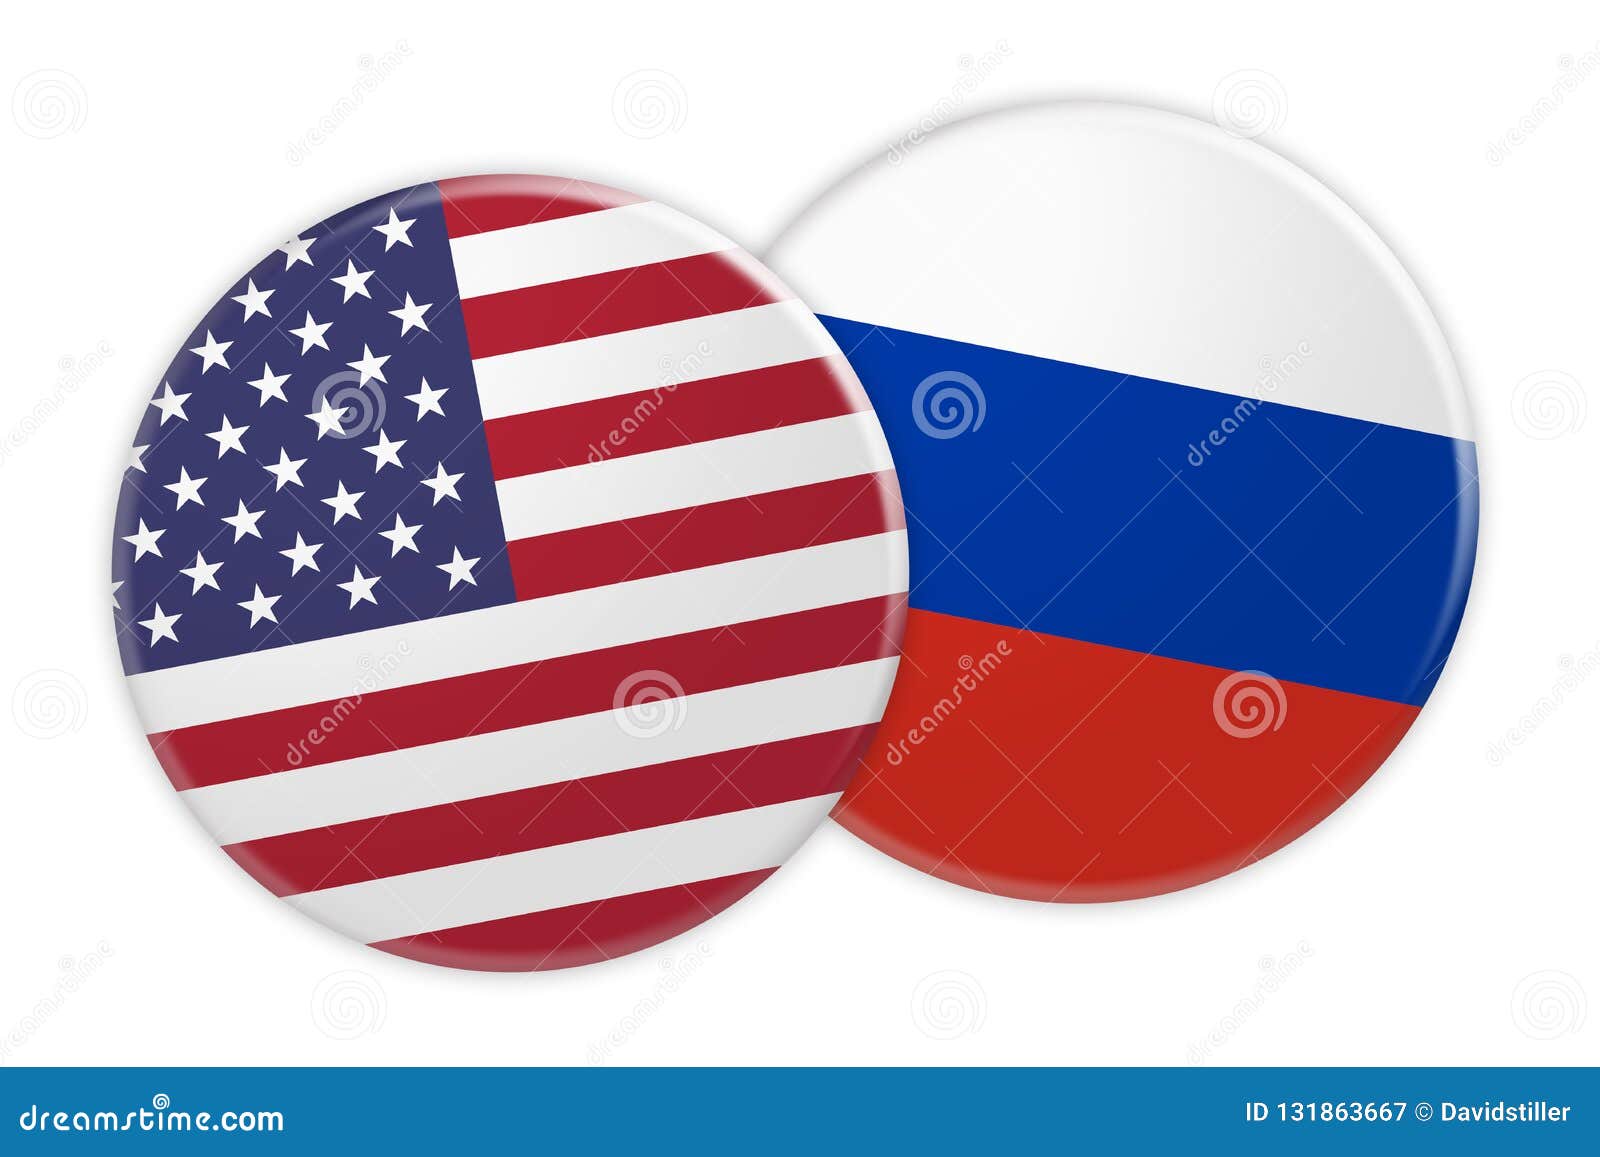 Glossy wave icon. Illustration of flag of Russia